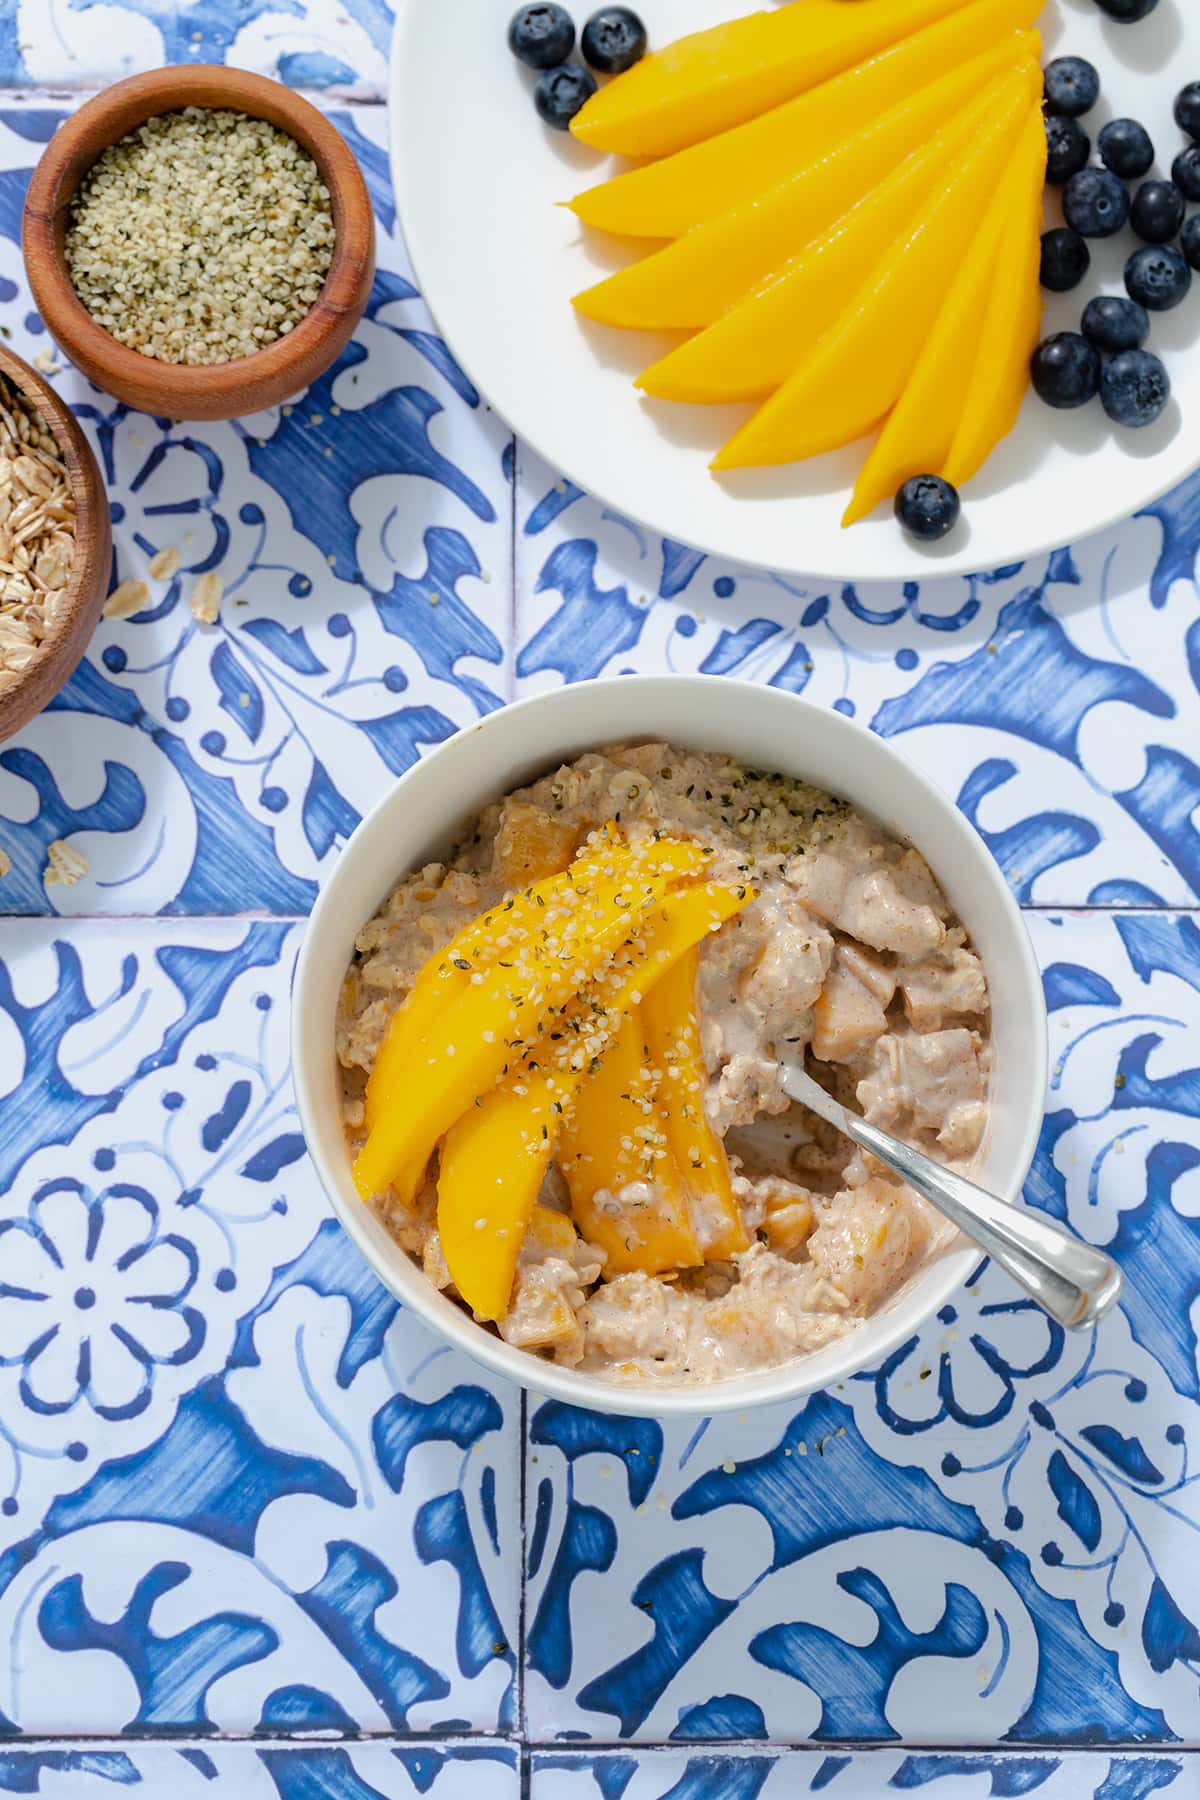 Mango overnight oats in a white bowl on a blue tile background. Mango on a white plate in the top right corner.